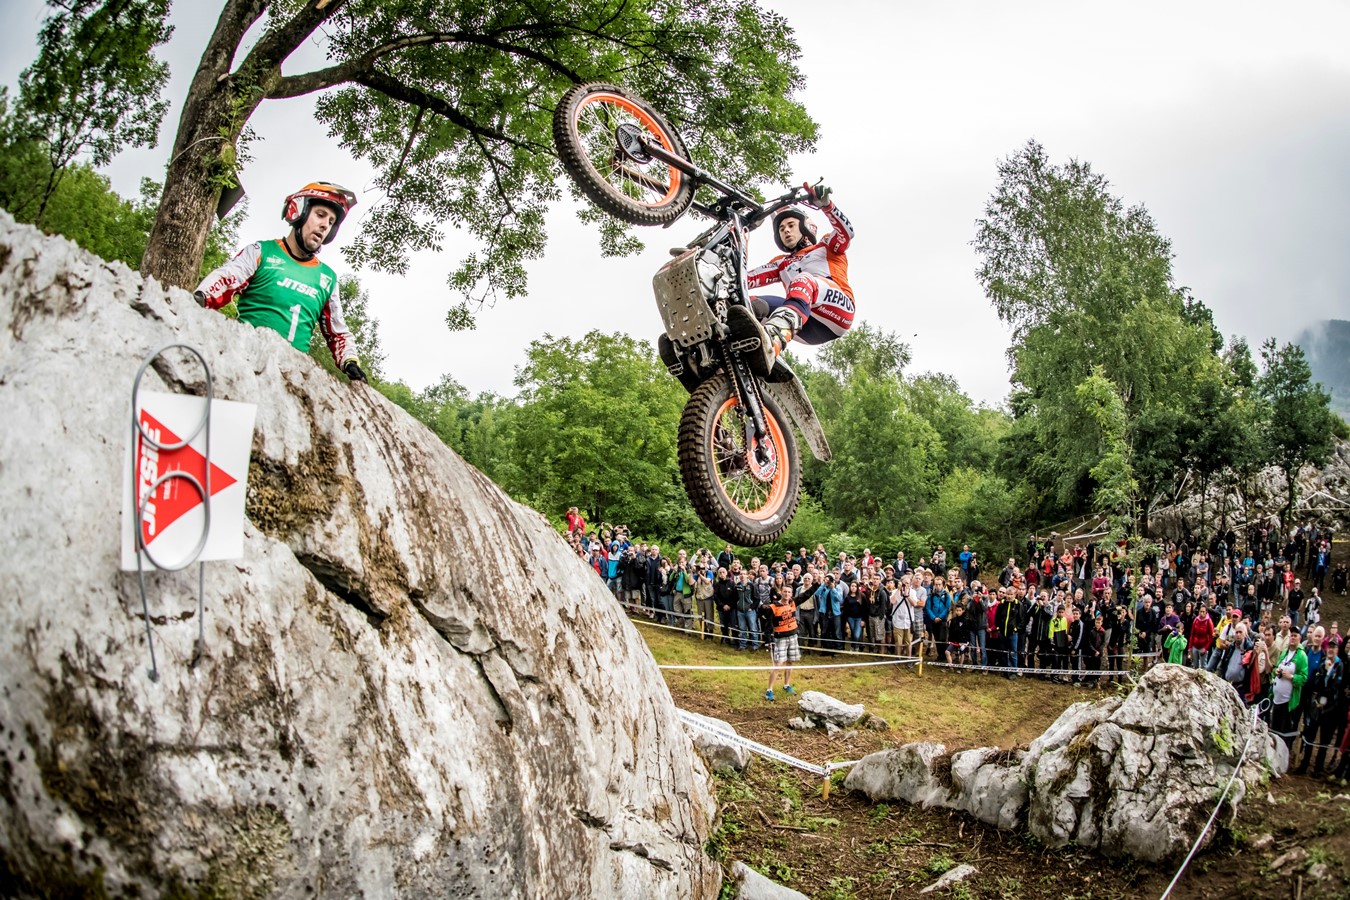 Brilliant win for Toni Bou in the French TrialGP